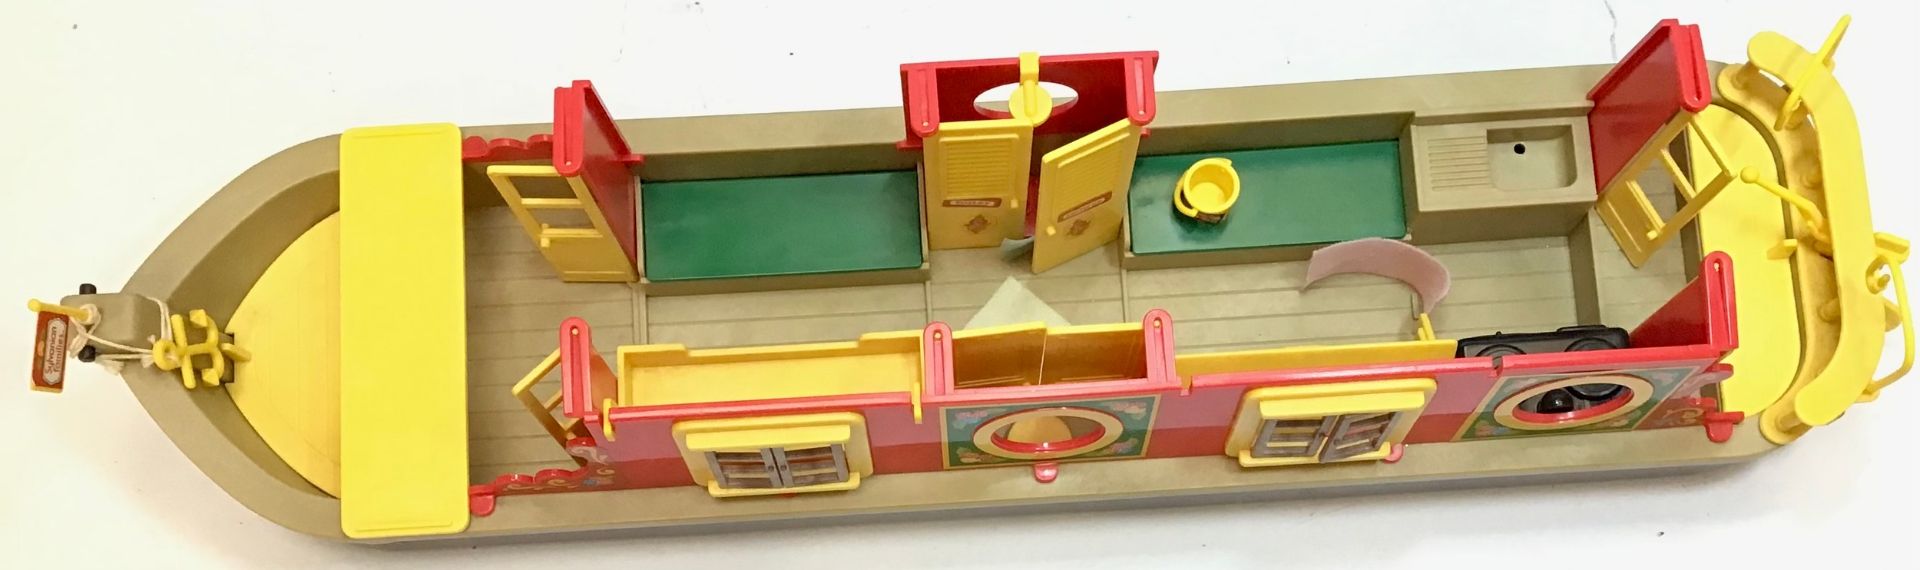 Sylvanian Families Canal Boat found here boxed and in VG+ condition with a set of otter family - Image 2 of 7